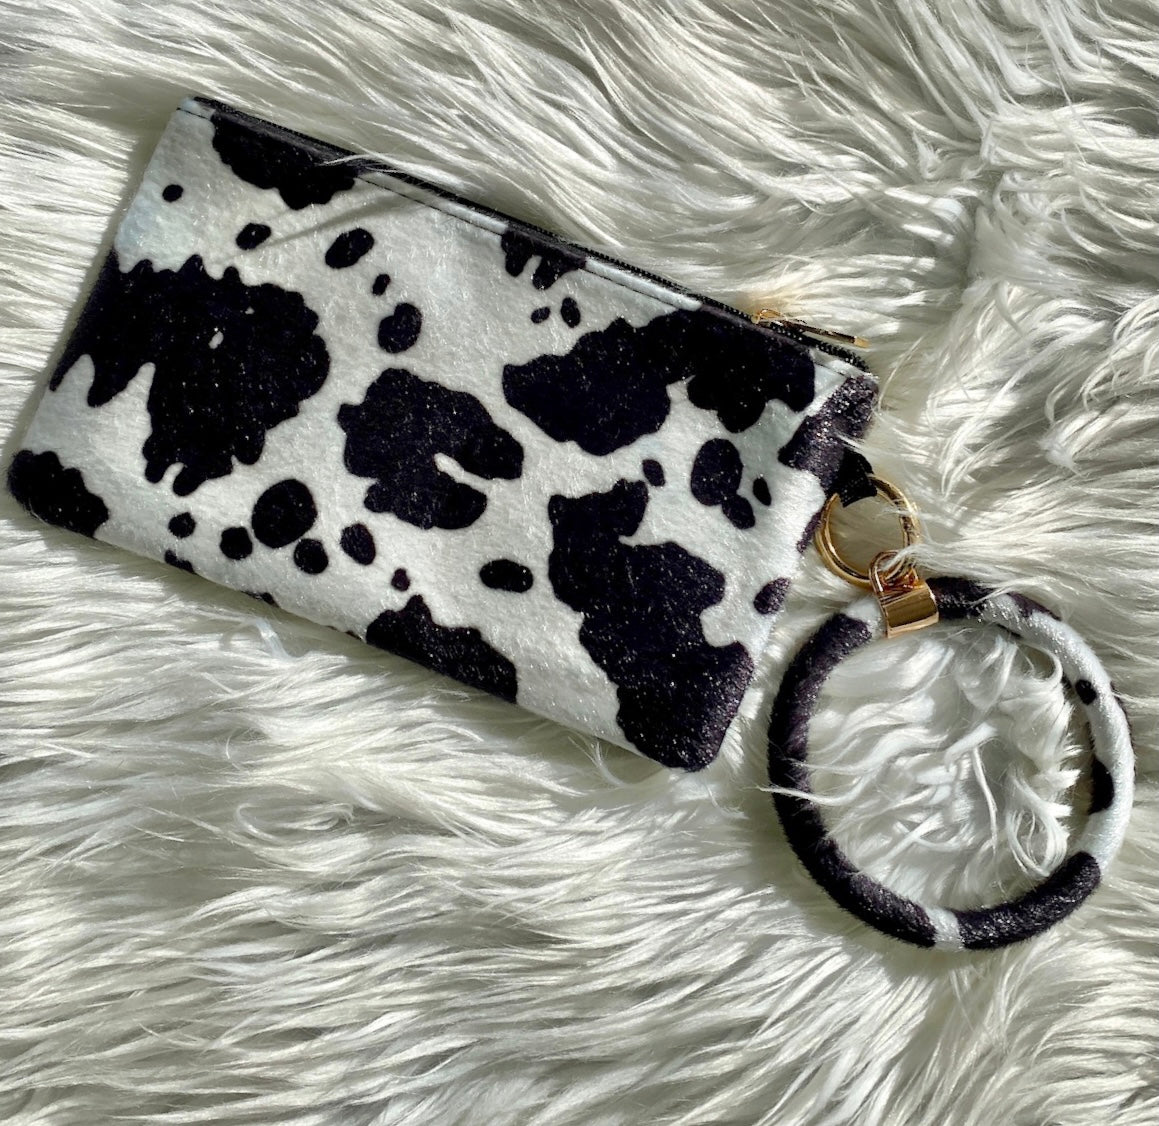 Print Leather Keychain Wallet